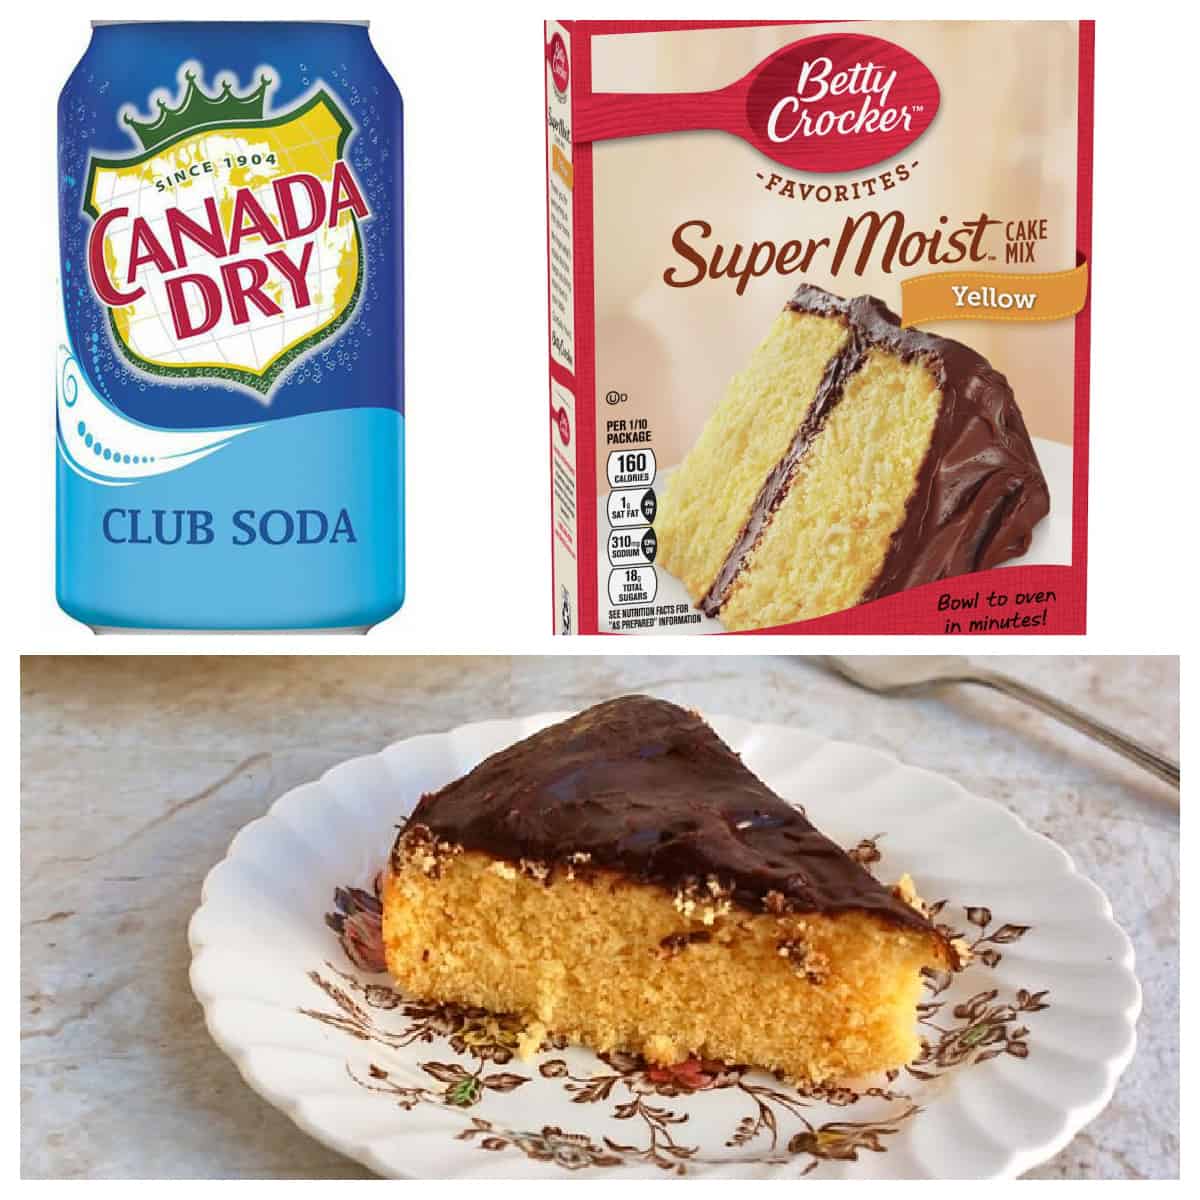 Collage: Can of Club Soda, Box of Betty Crocker Yellow Cake mix, Slice of chocolate frosted yellow cake